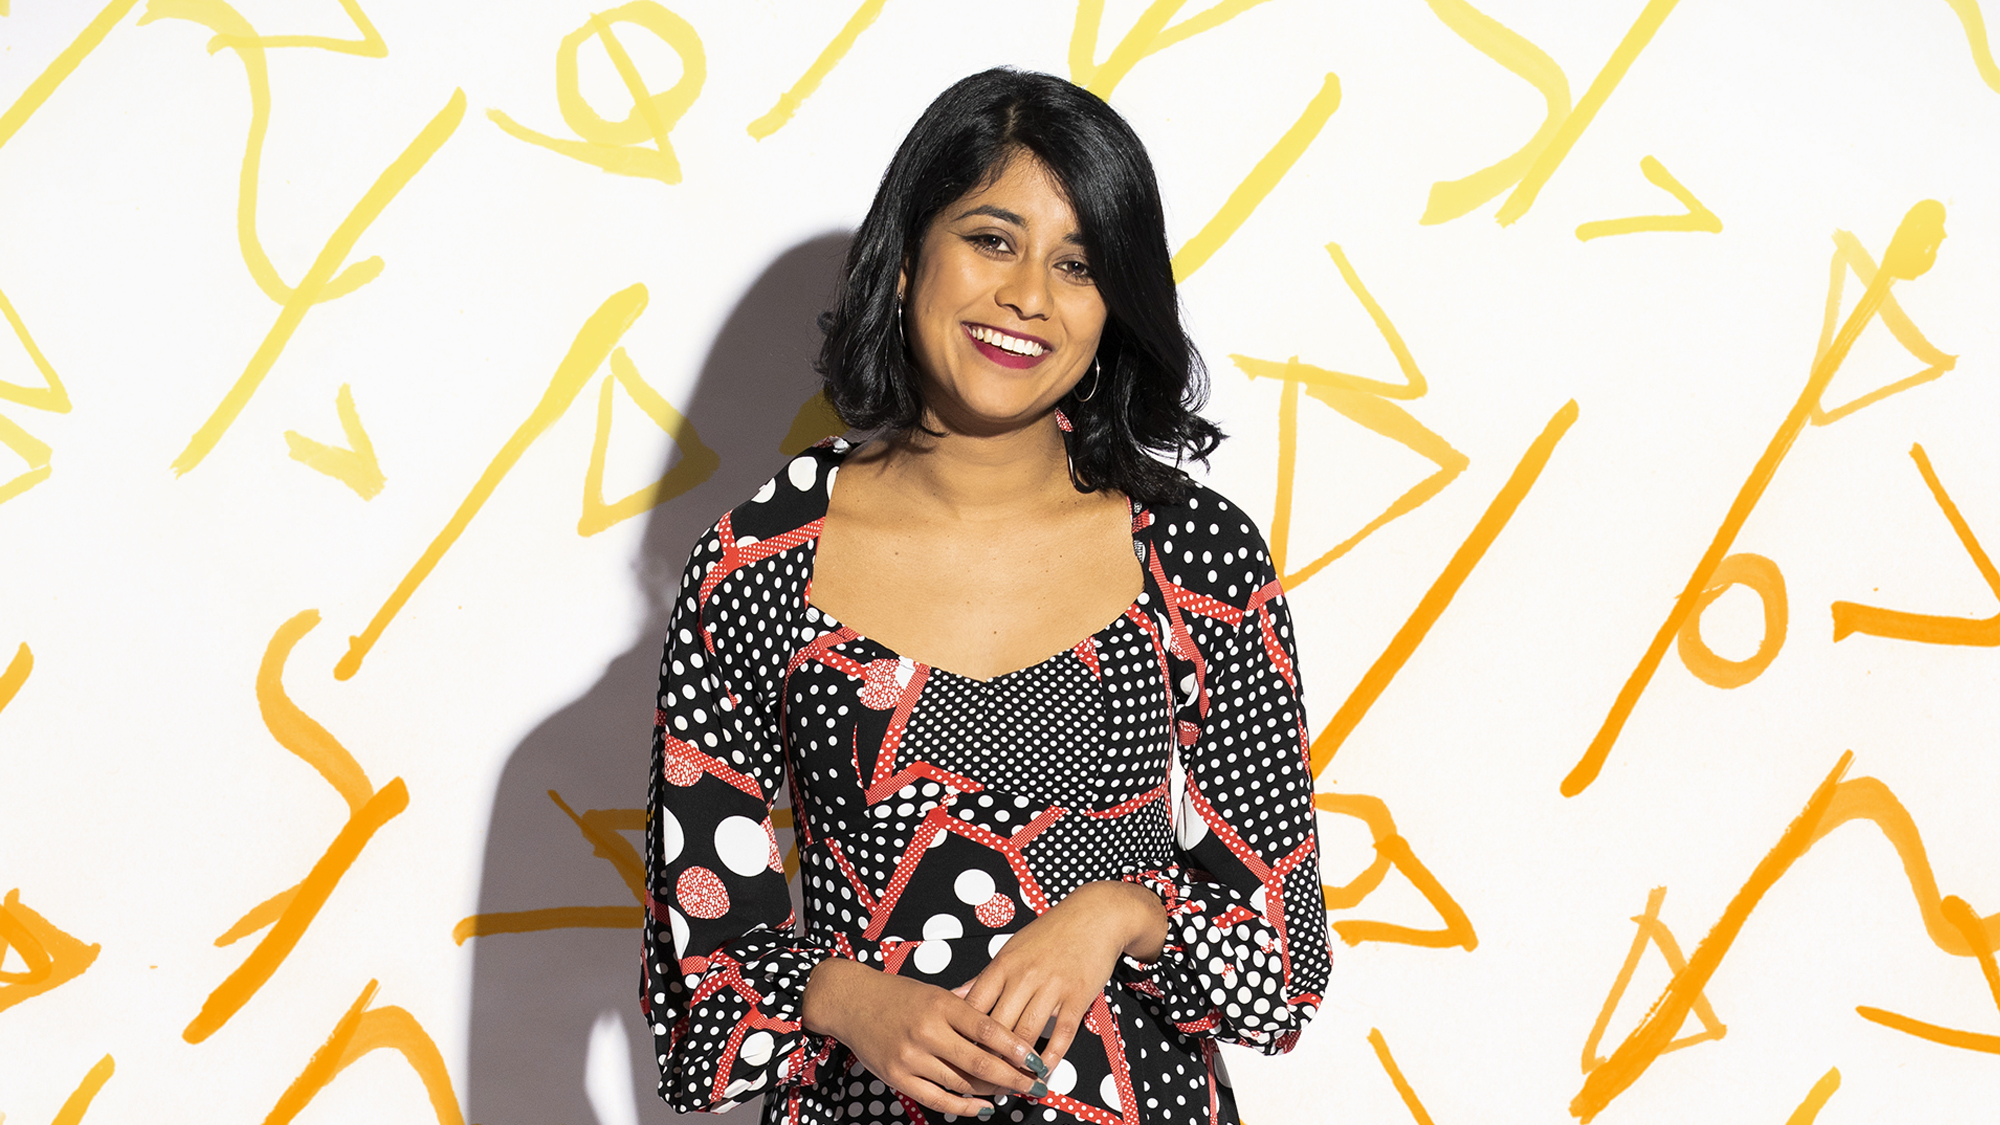 Triple j’s Avani Dias and Nat Tencic to depart the station next month